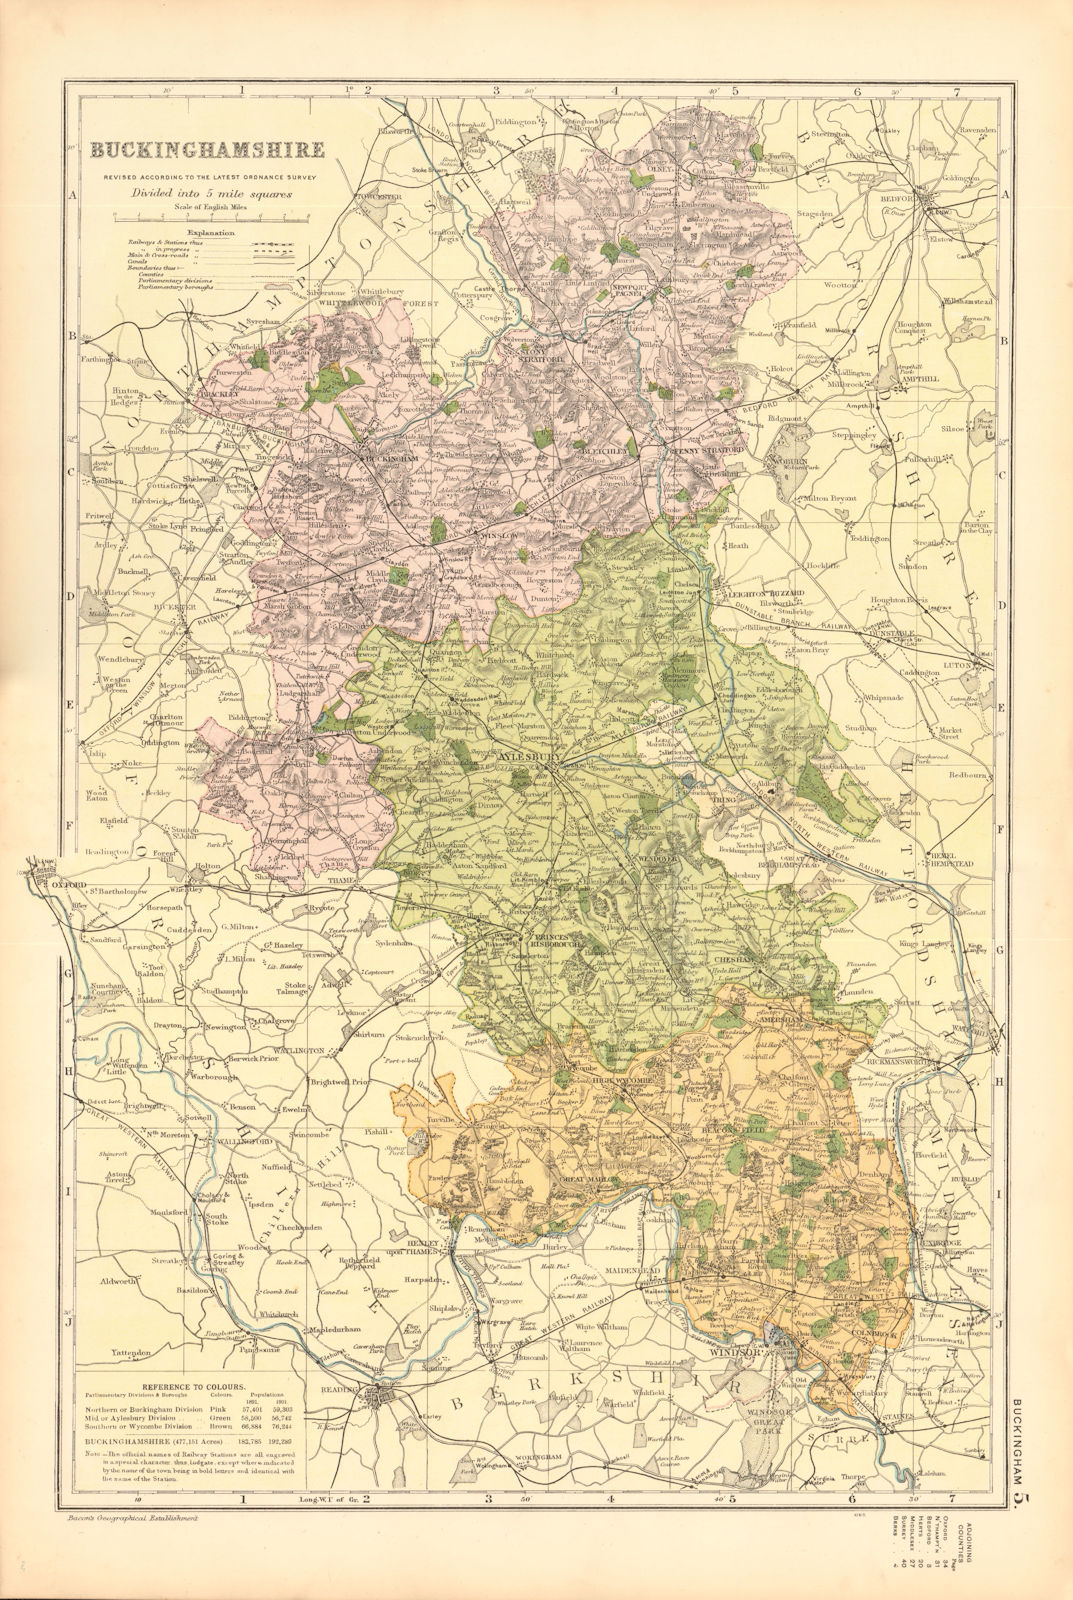 BUCKINGHAMSHIRE. Showing Parliamentary divisions,boroughs & parks.BACON 1904 map